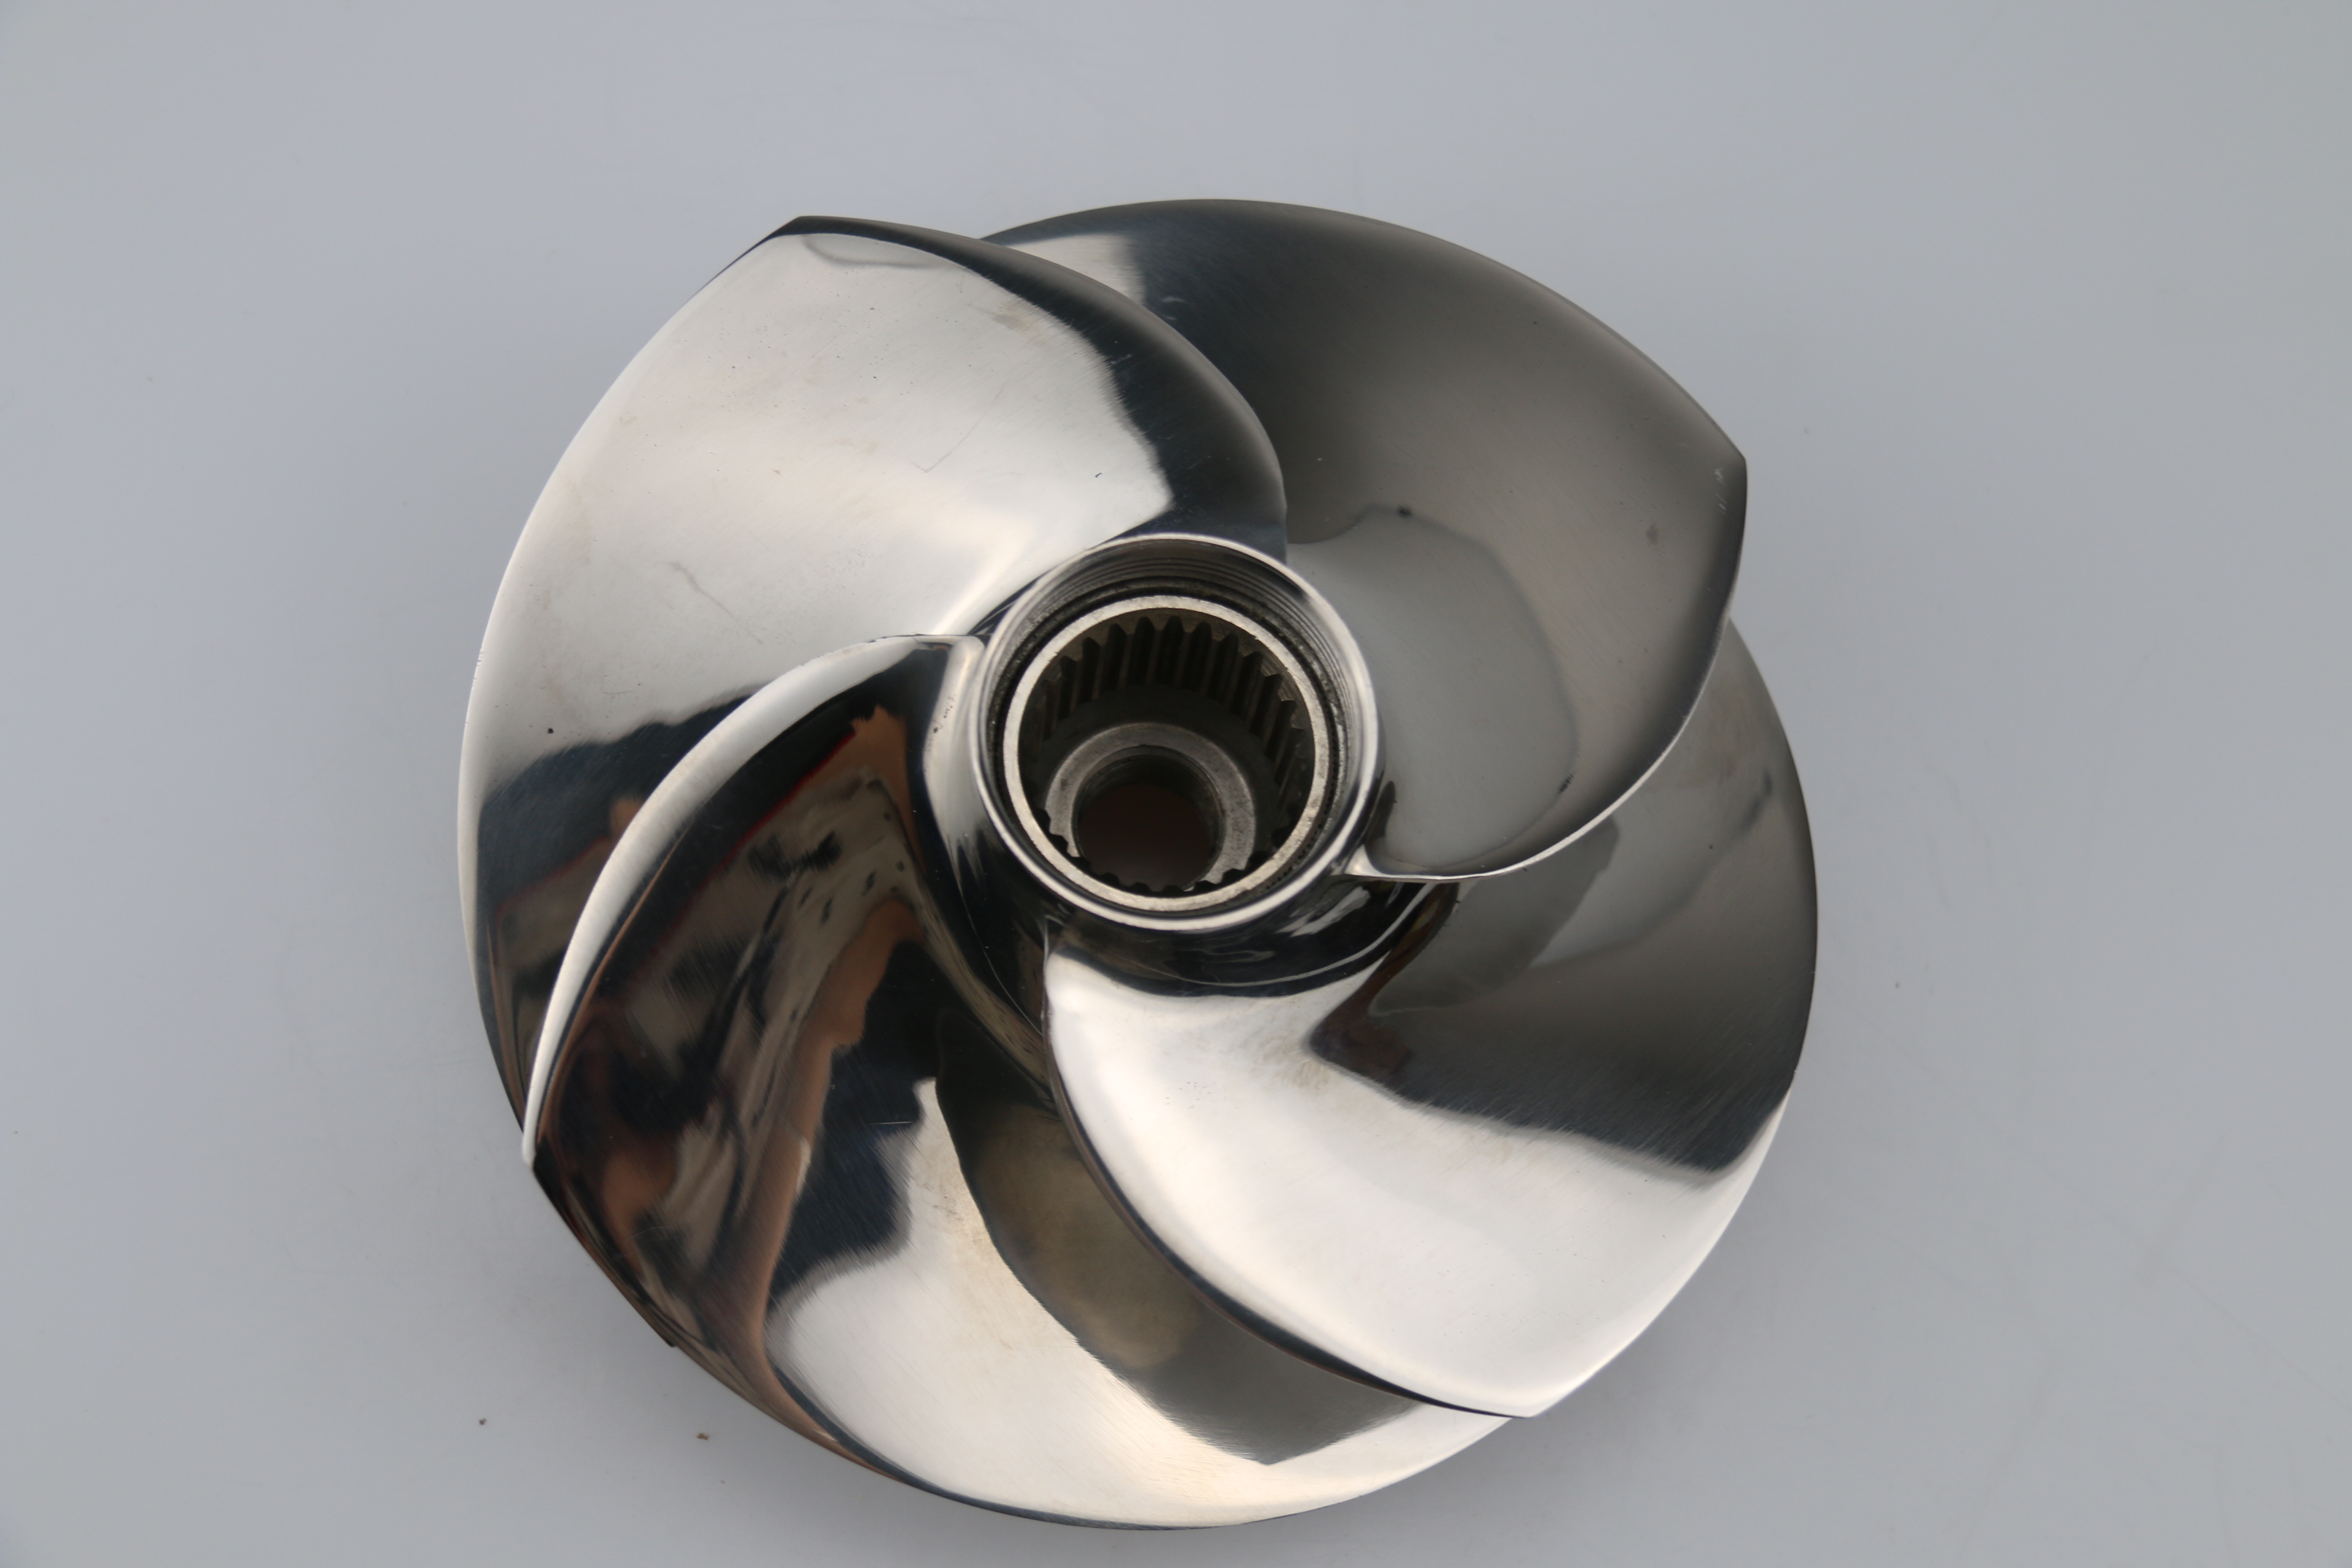 Jet Ski Impeller Diameter 159mm Matched With Seadoo 2009-New GTX LTD IS 255 GTX LTD iS 260 and 2009-2015 RXP-X 255 RXP-X 260 SRZ-CD-15/21A 